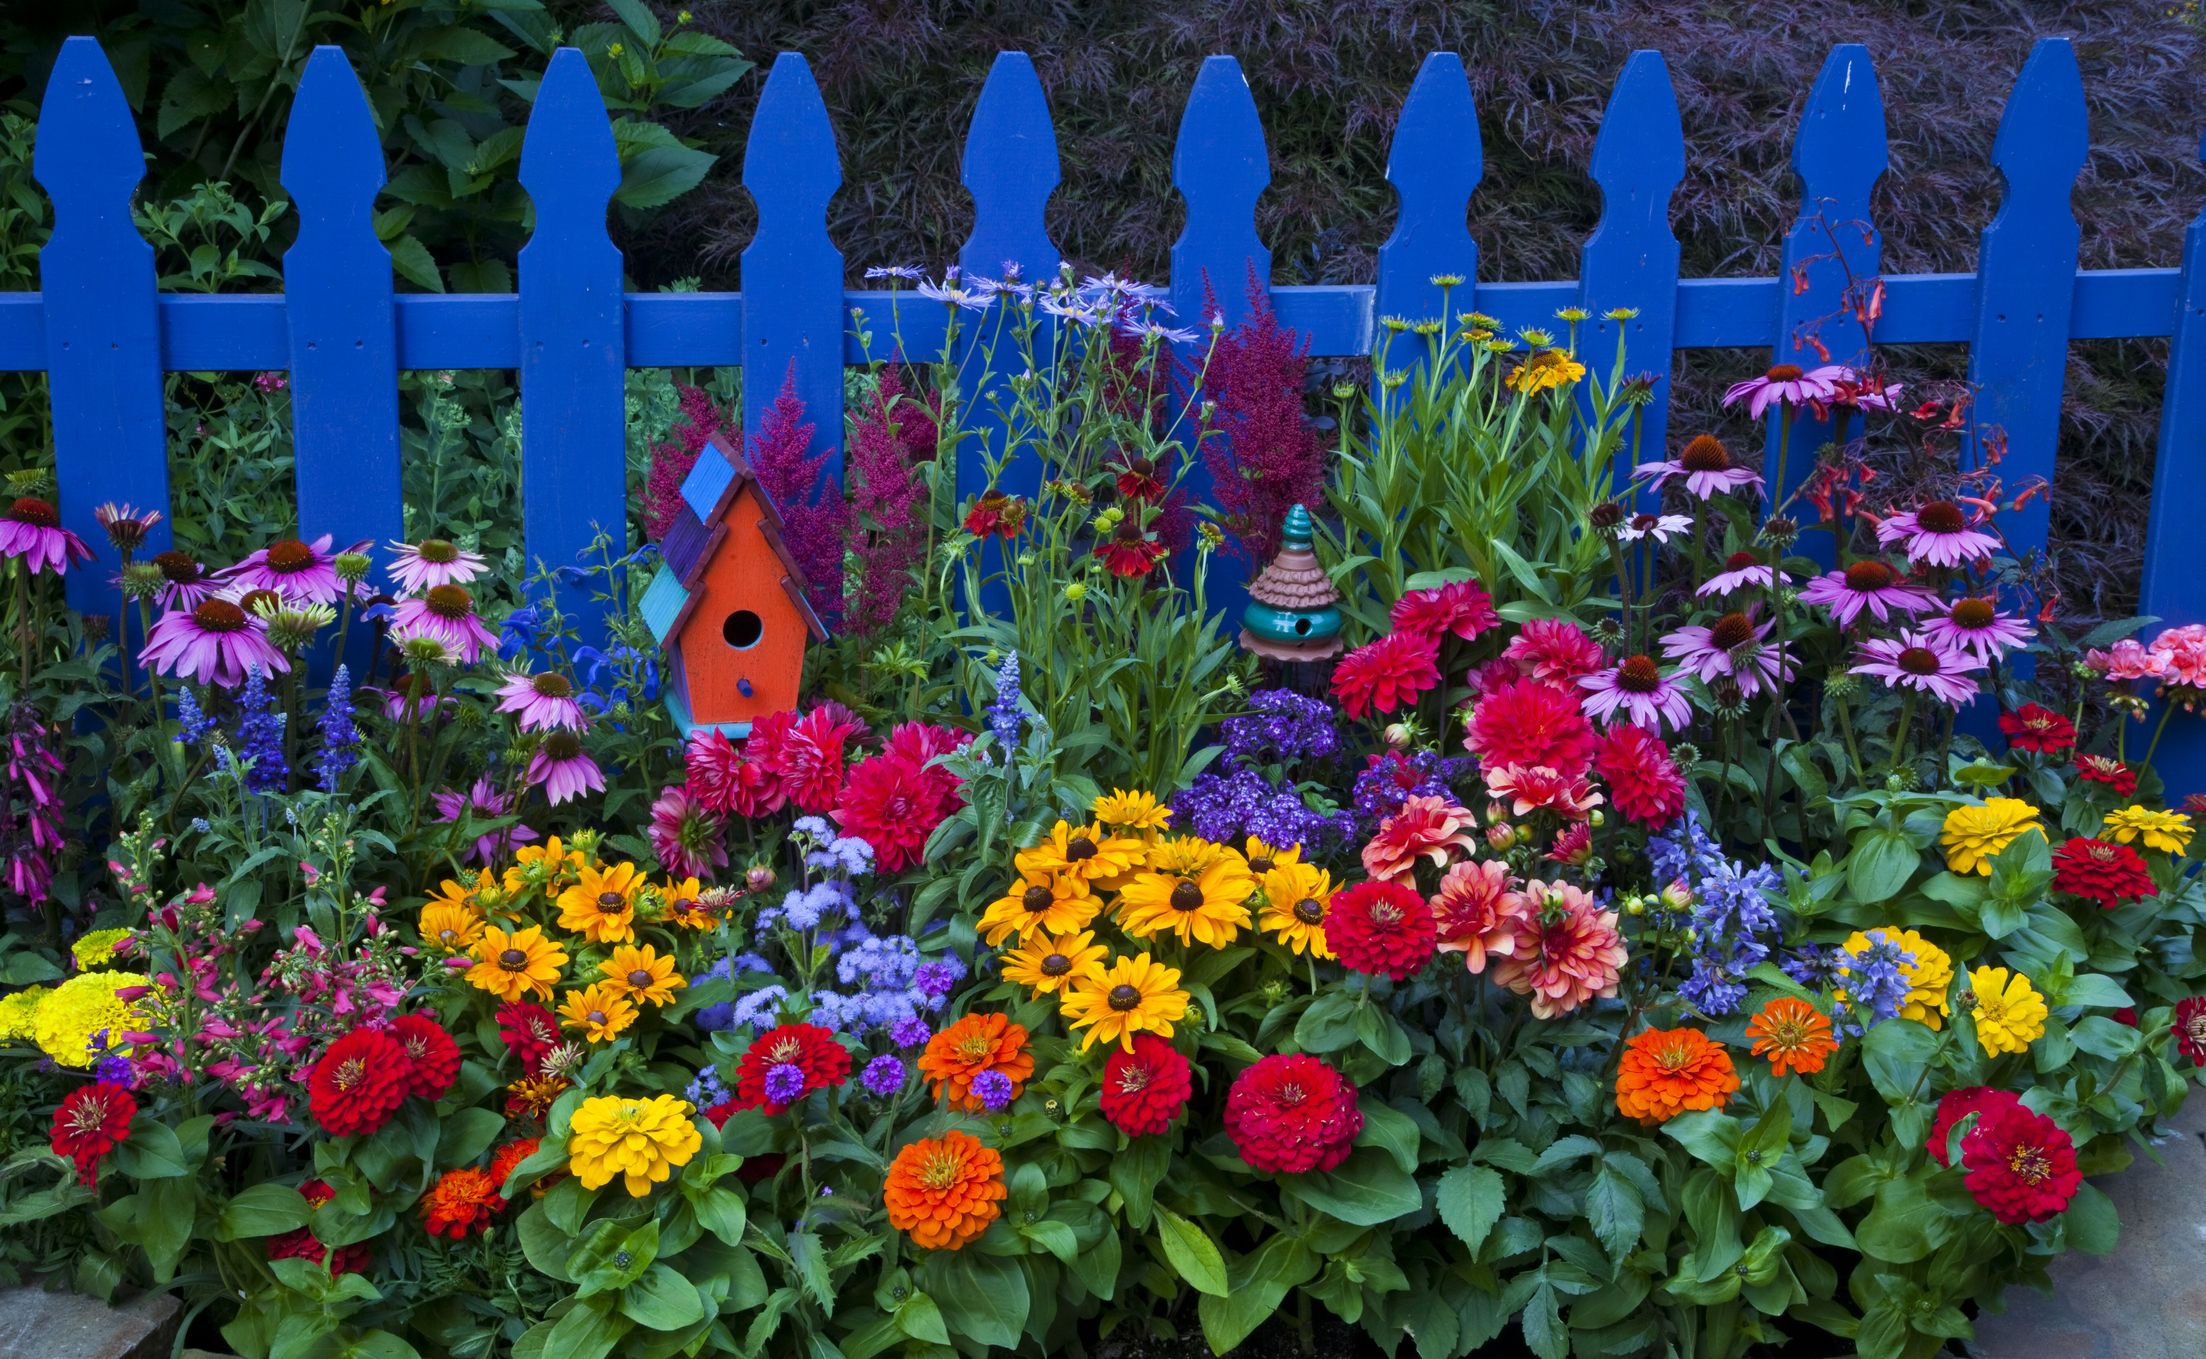 https://hips.hearstapps.com/hmg-prod/images/blue-picket-fence-with-colorful-flowers-royalty-free-image-1679944124.jpg